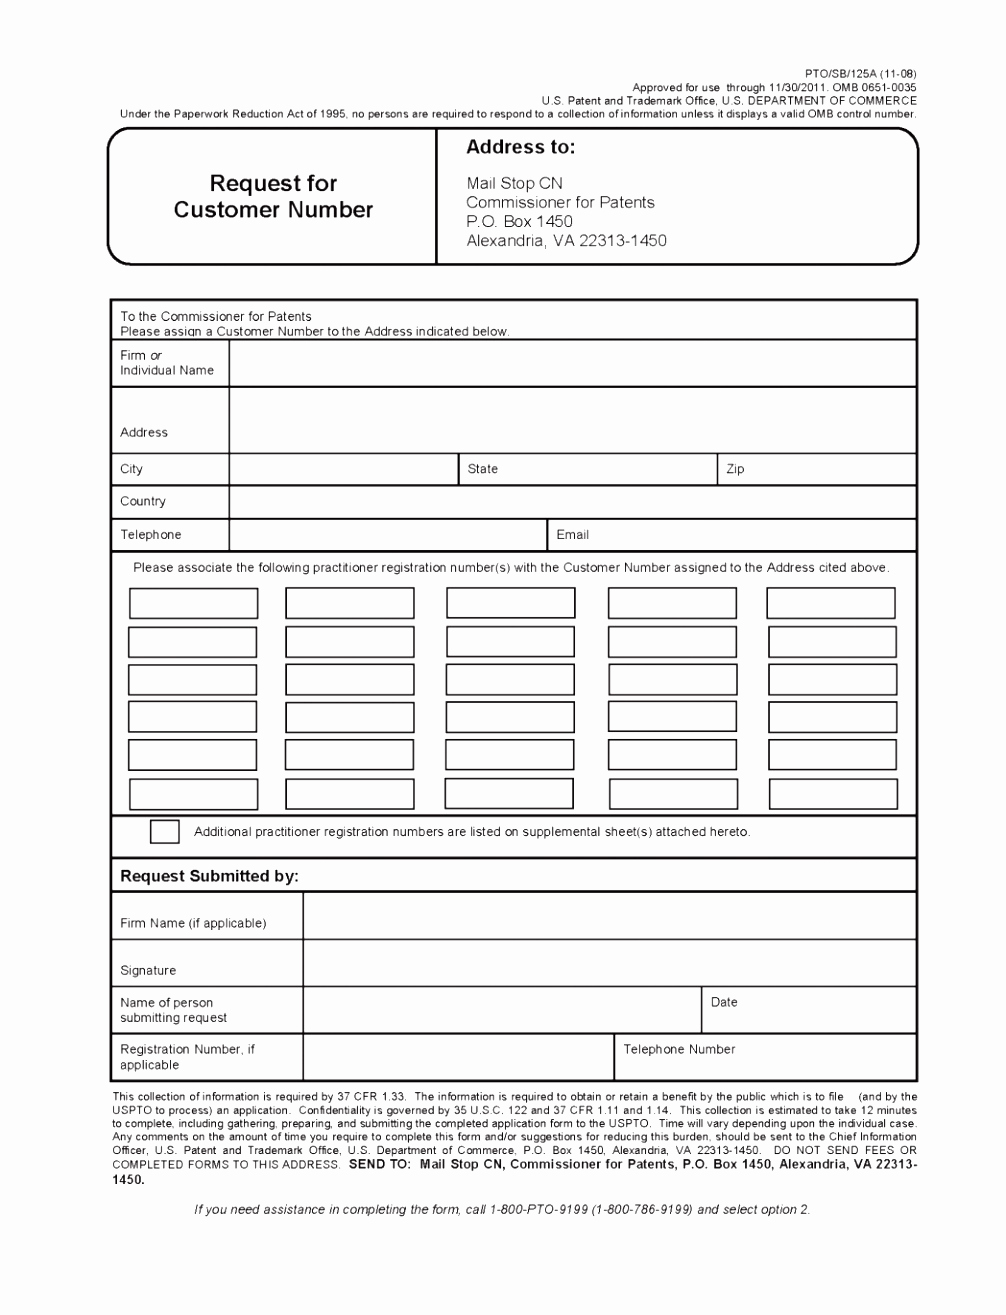 Maintenance Request form Template Lovely 8 Apartment Maintenance Request form Template Eerzr